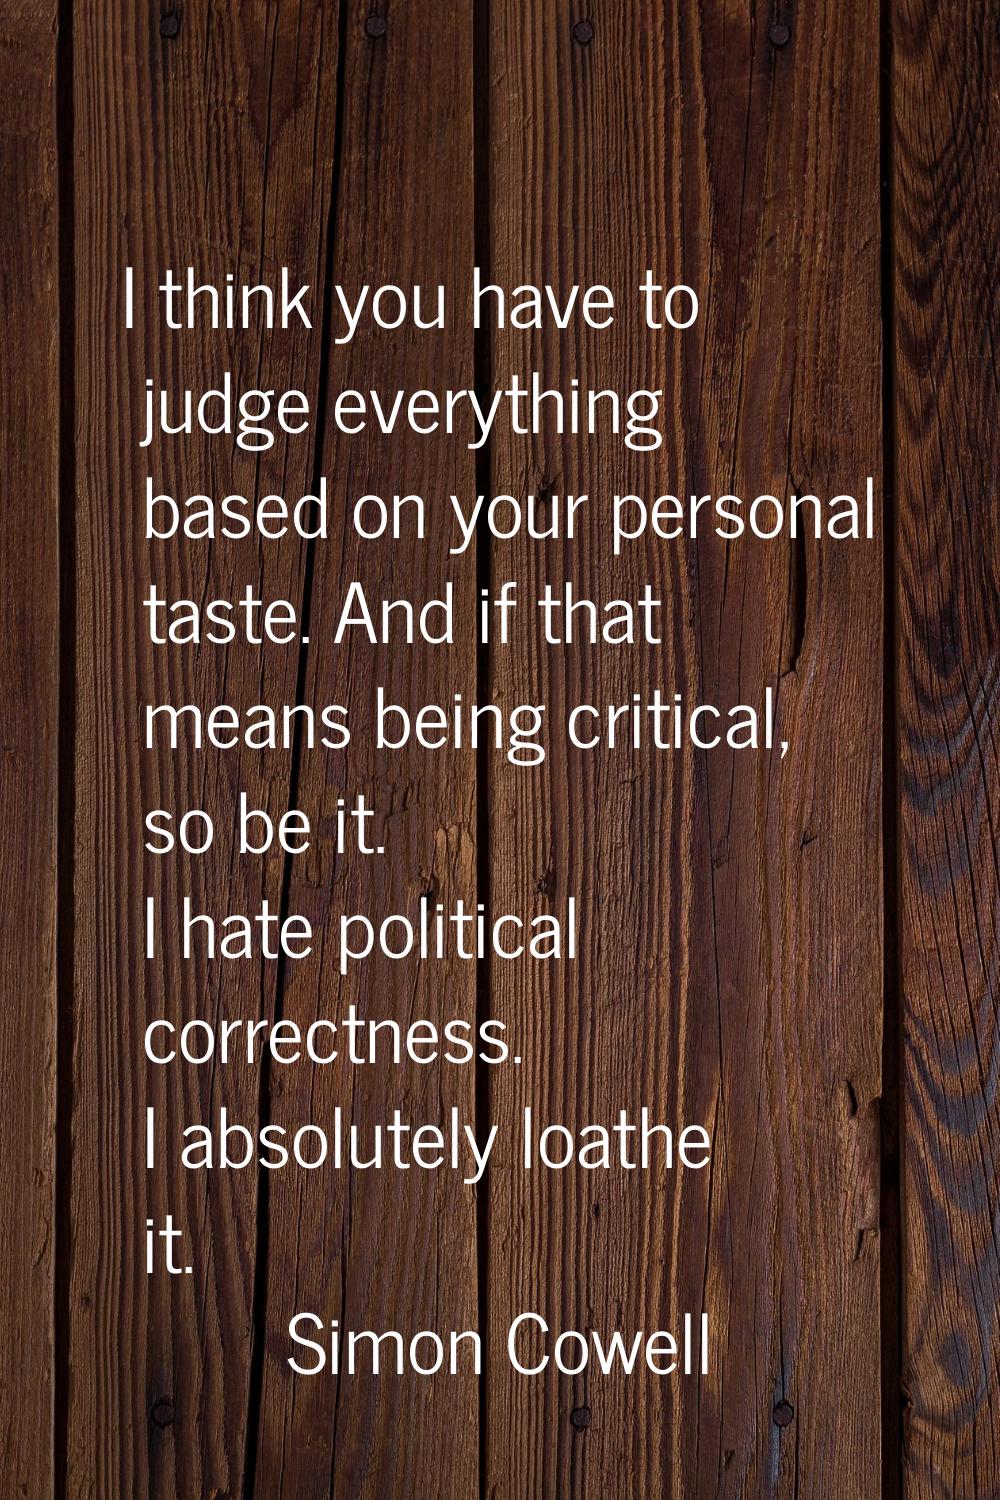 I think you have to judge everything based on your personal taste. And if that means being critical